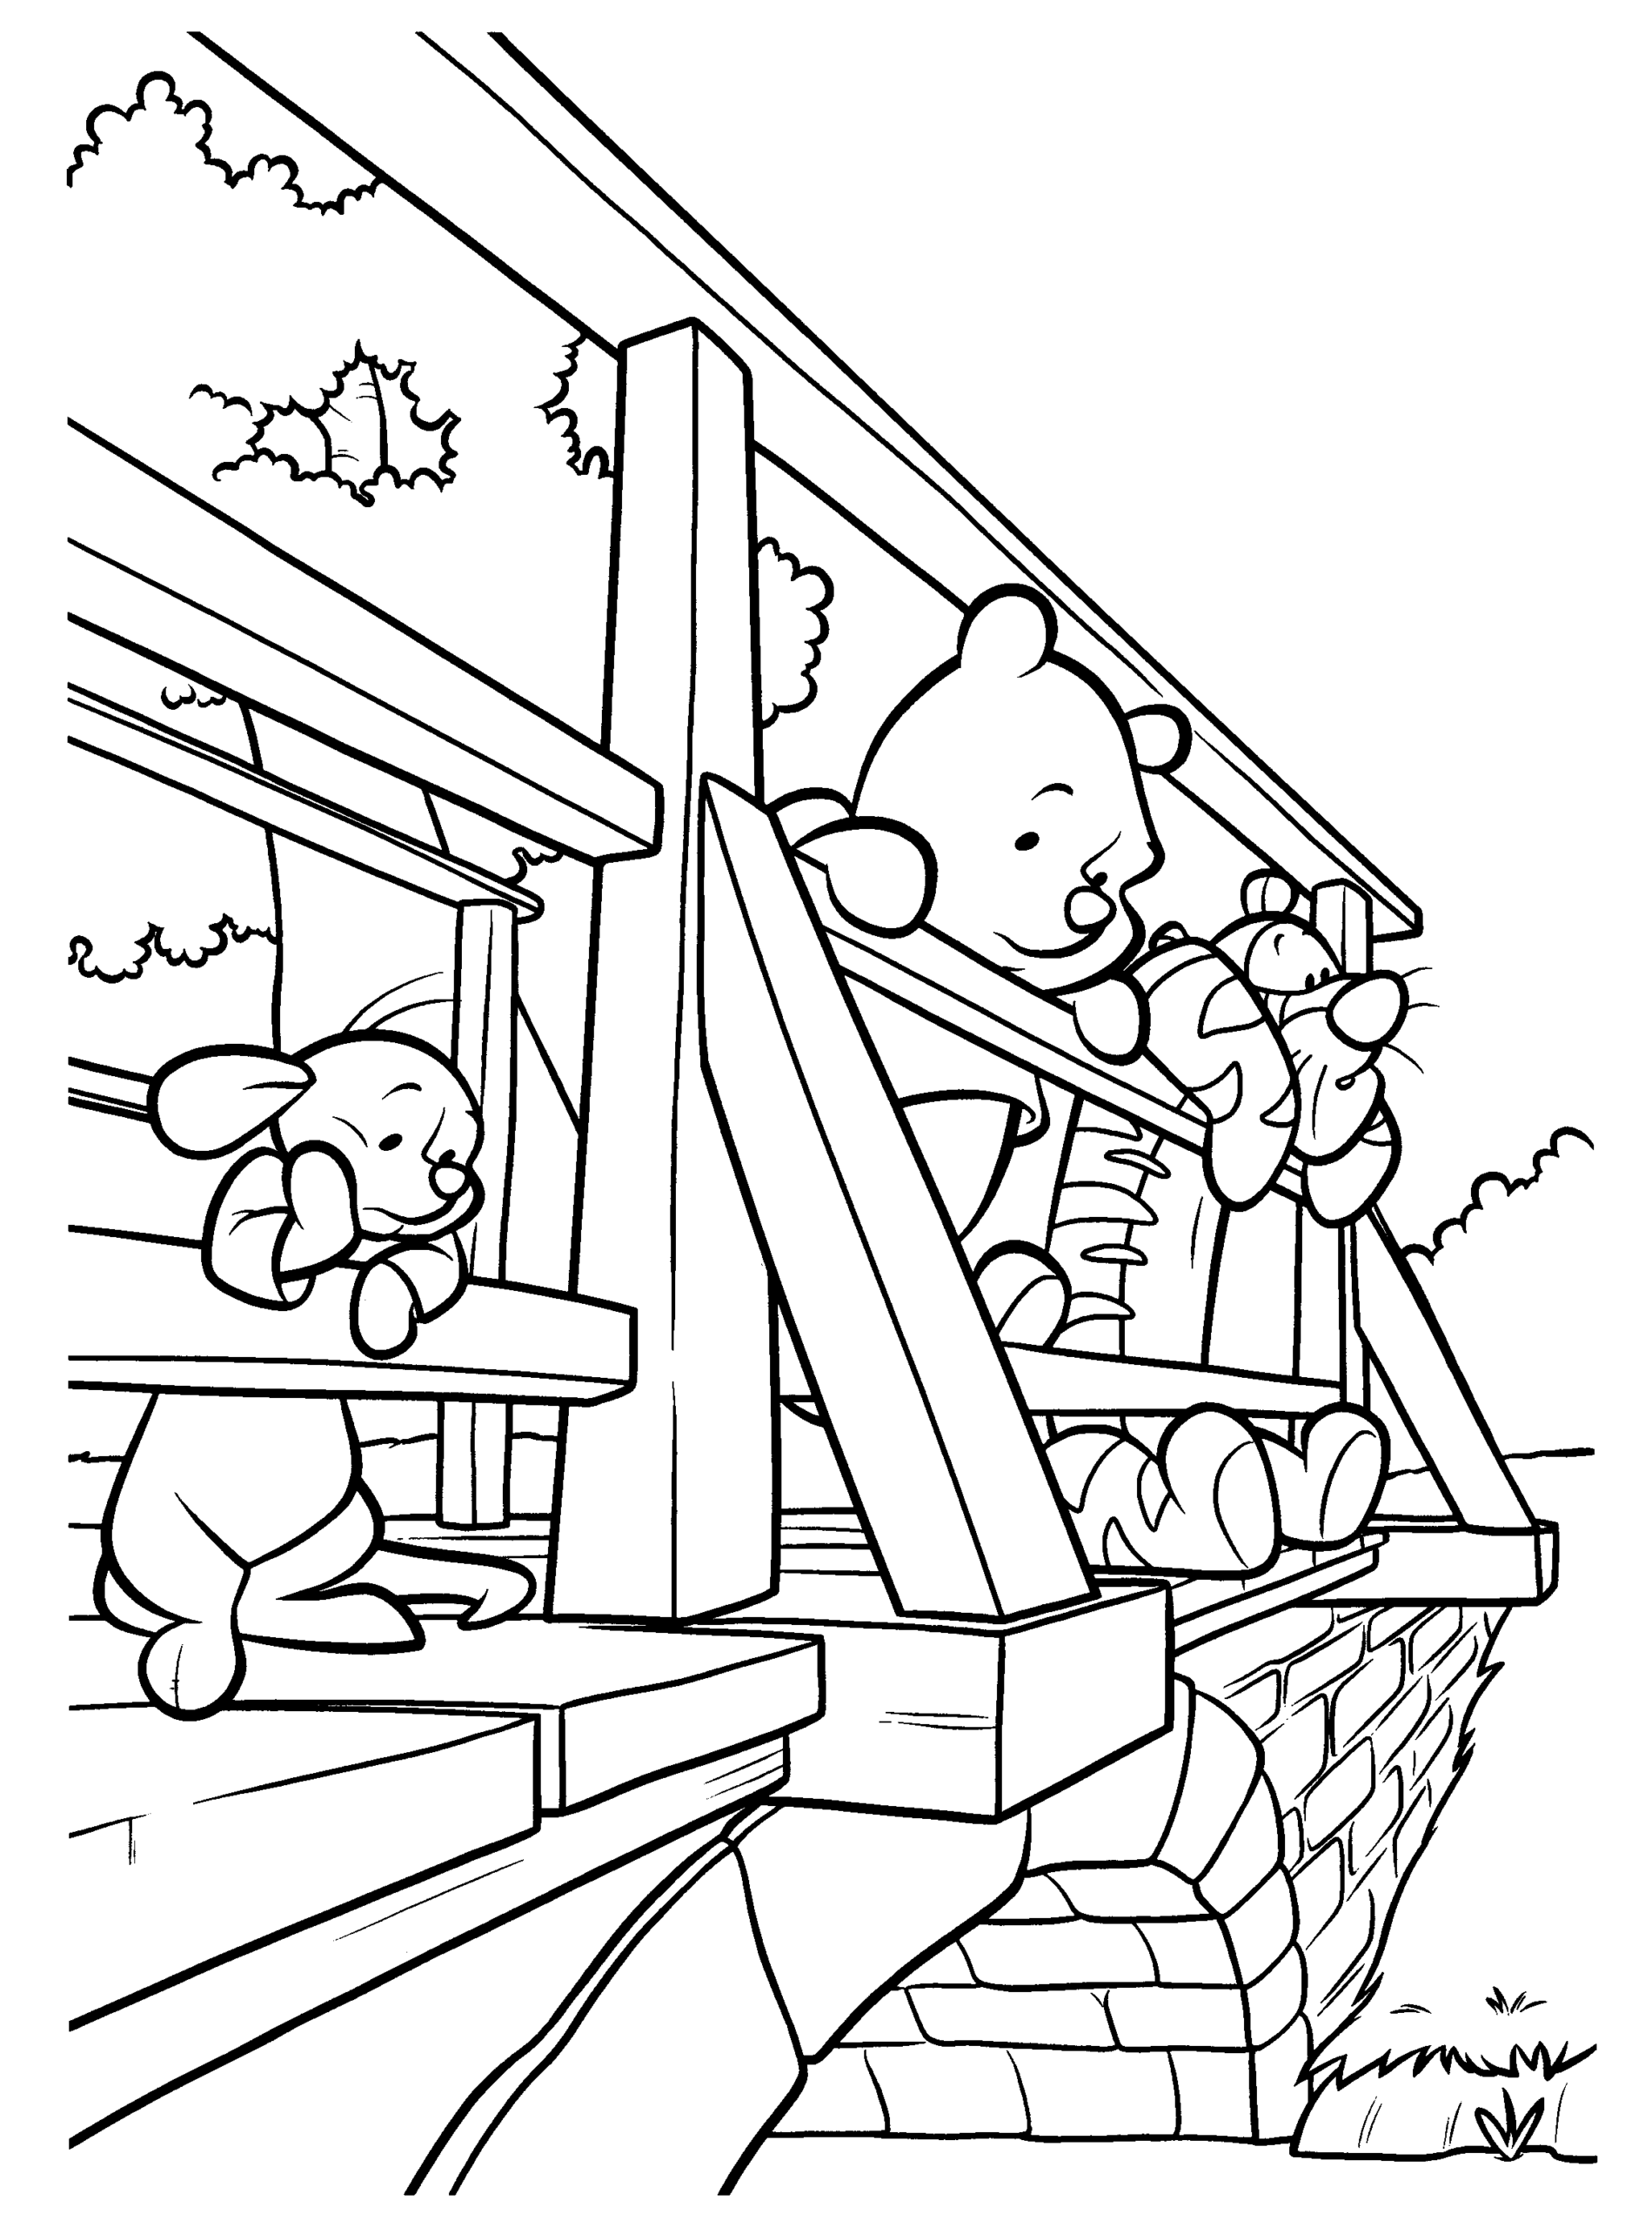 Winnie the Pooh Coloring Pages Cartoons winnie the pooh 20 Printable 2020 7117 Coloring4free